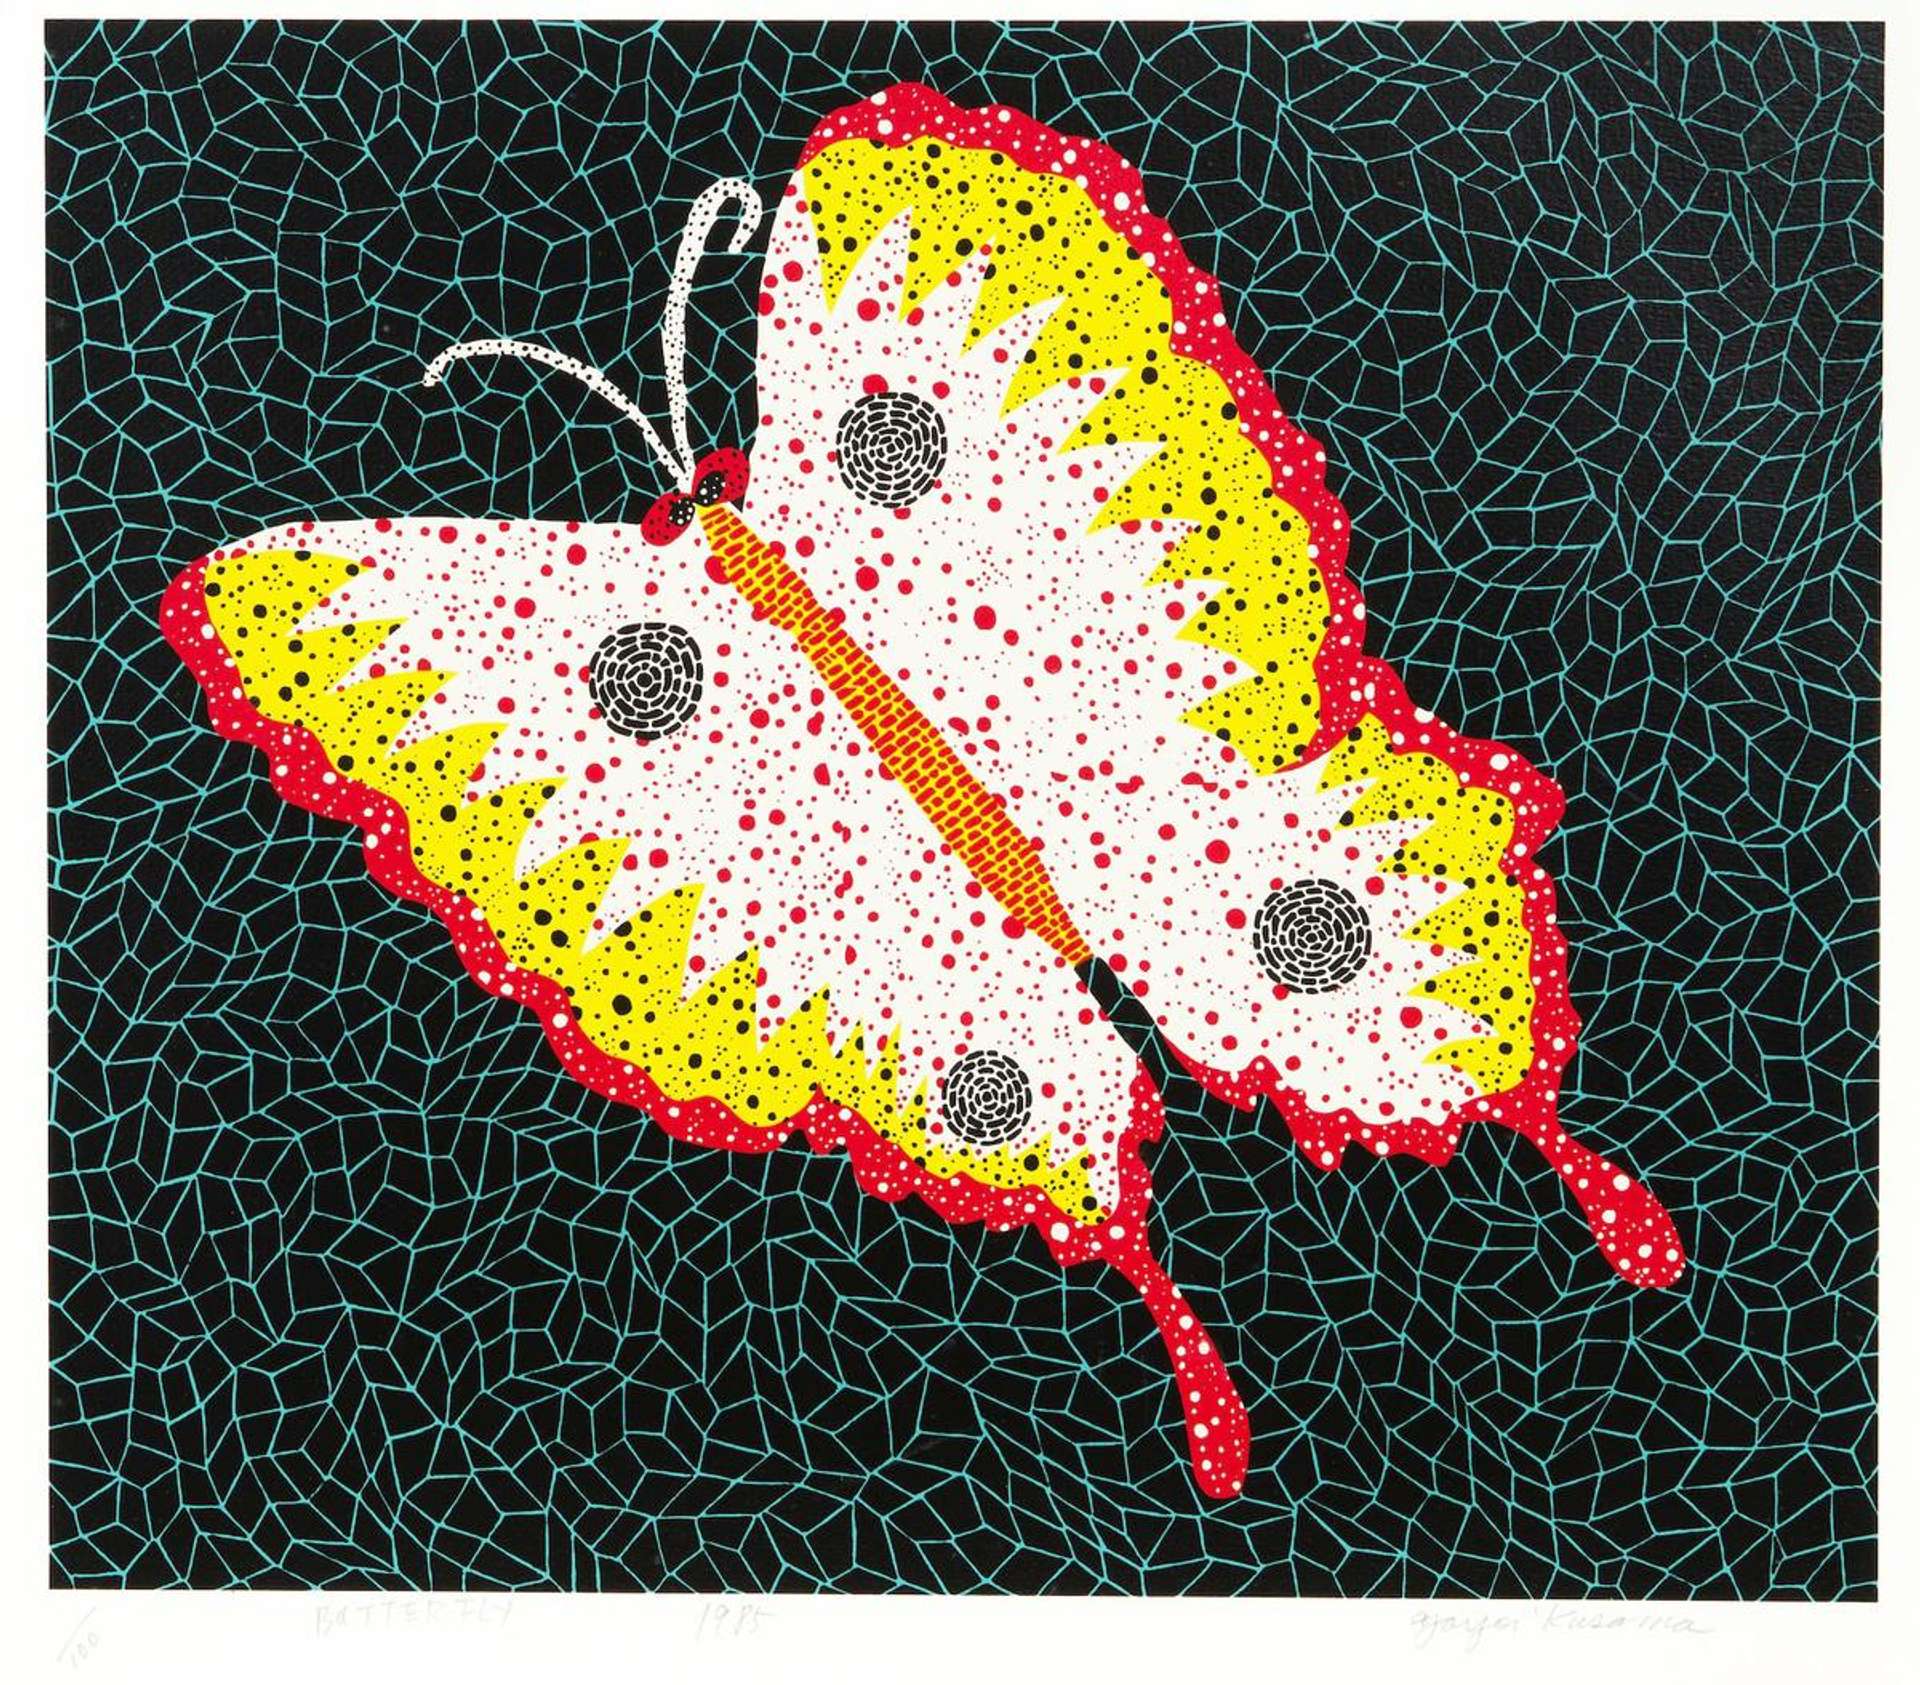 A white, red, and yellow butterfly designed with a pattern of dots against a dark background 